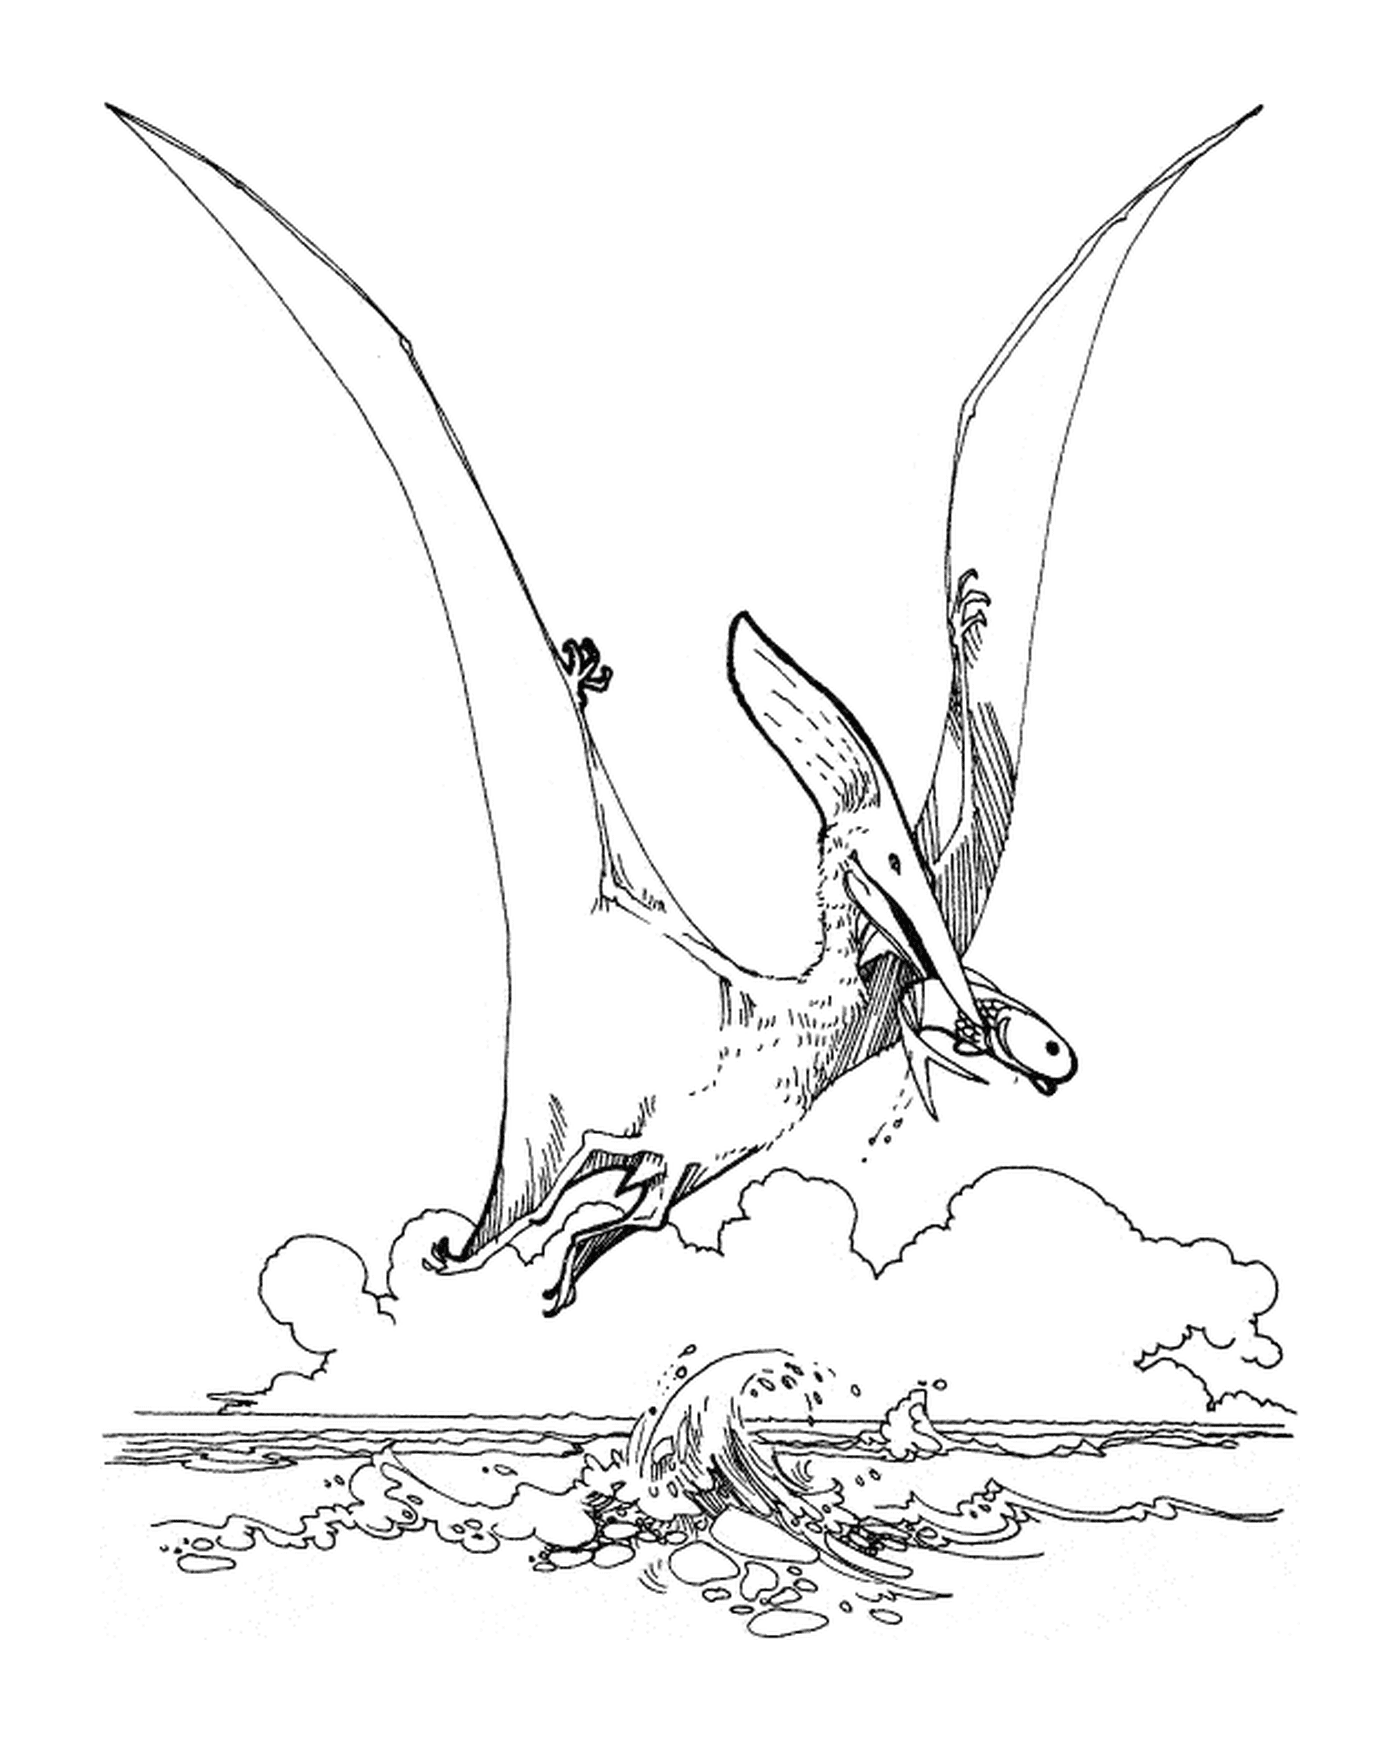  Pterodactyl over an area of water 